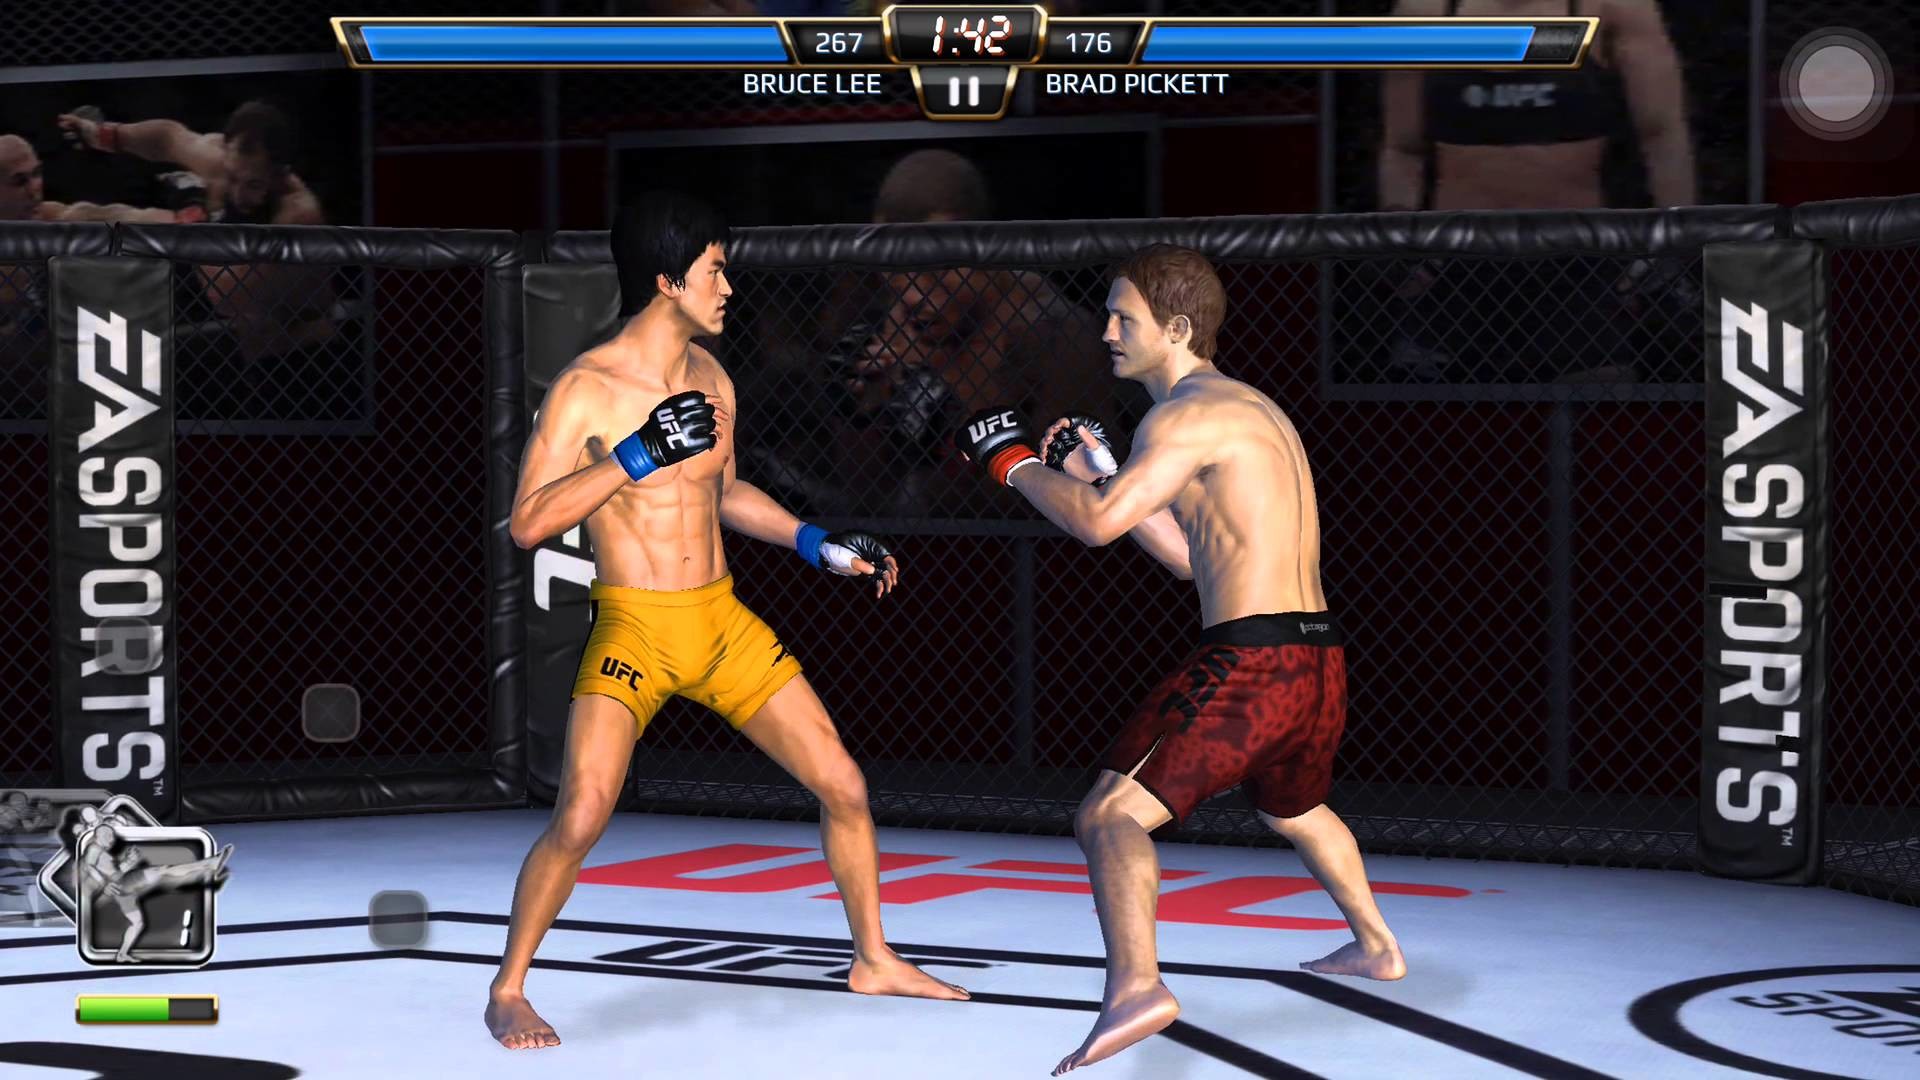 1920x1080 EA Sports UFC Bruce Lee - iOS / Android - HD Gameplay Trailer - YouTube